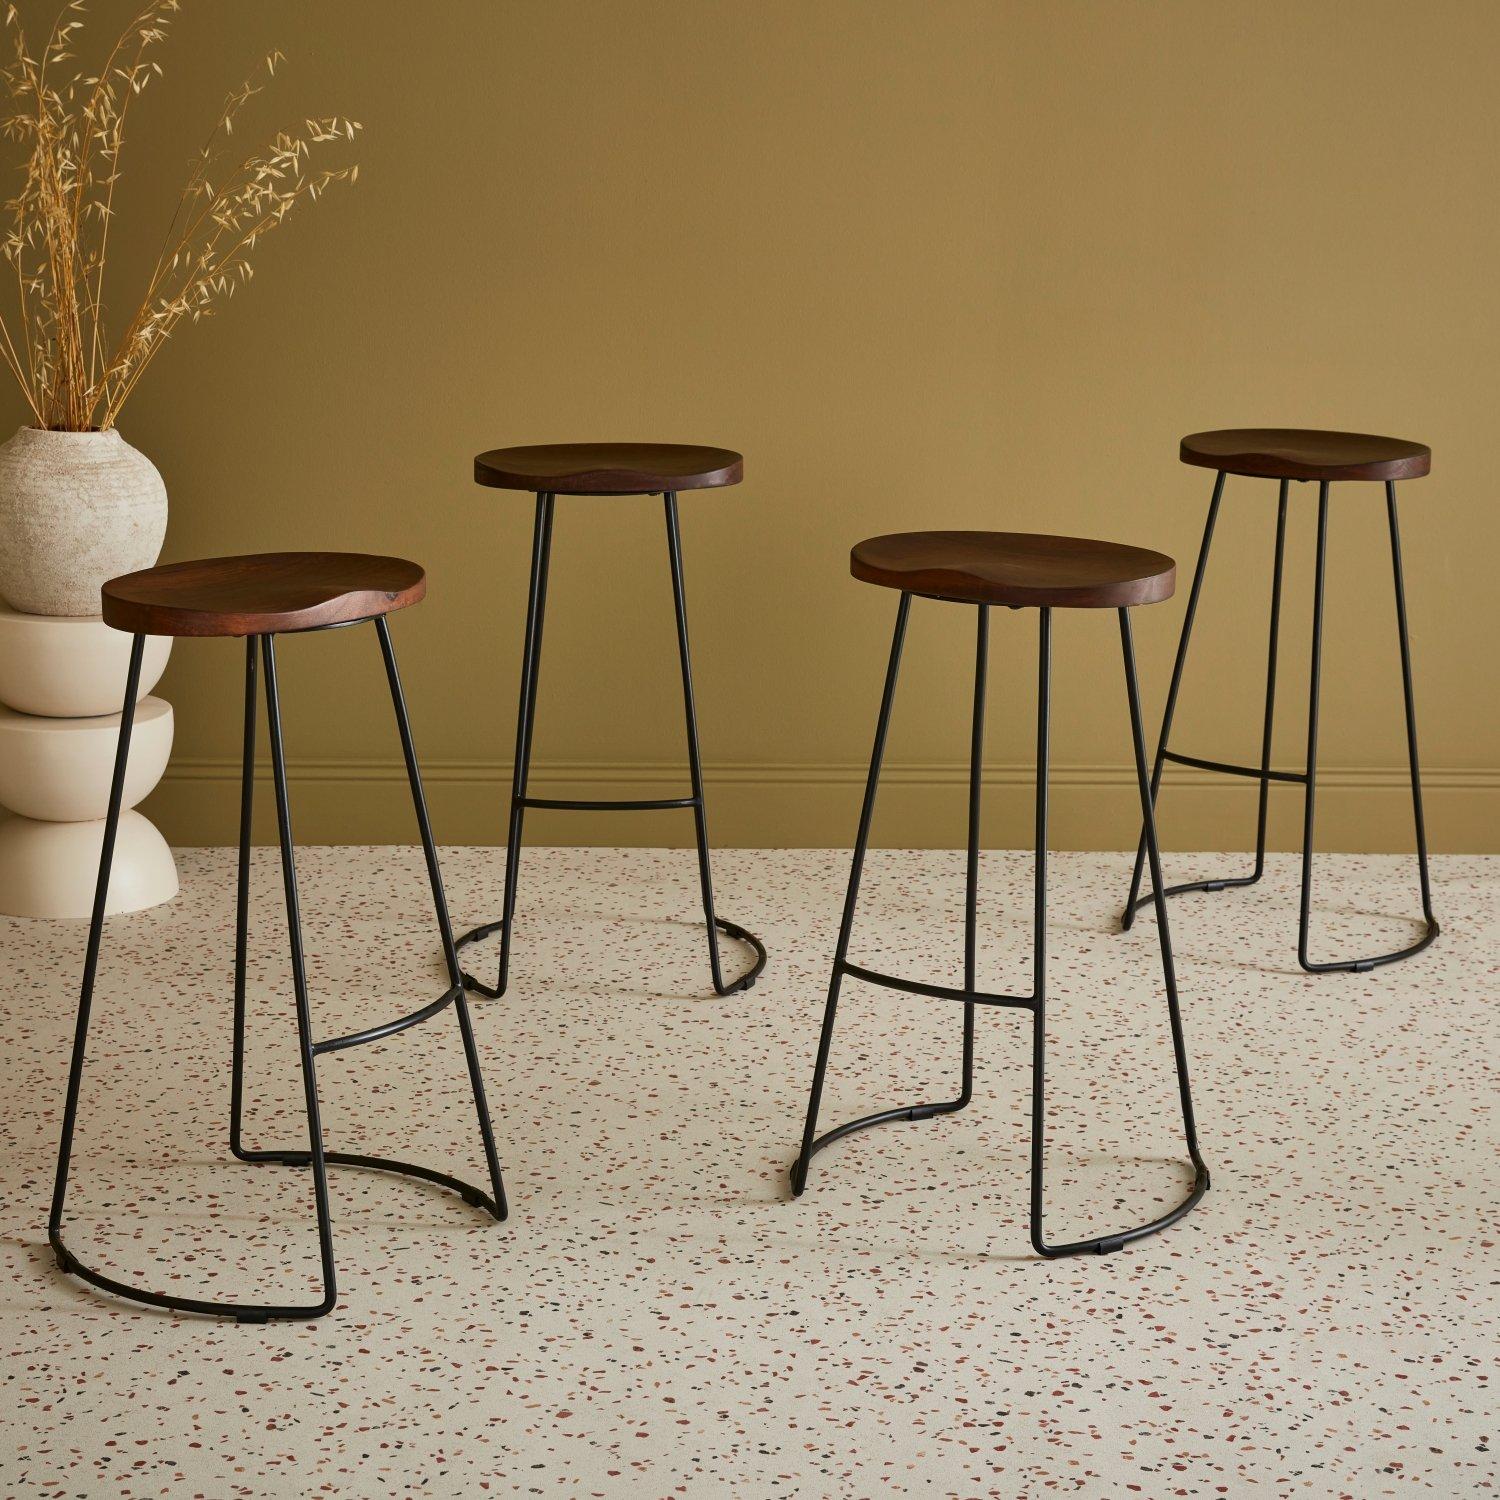 Set Of 4 Industrial Metal And Wooden Bar Stools 75cm